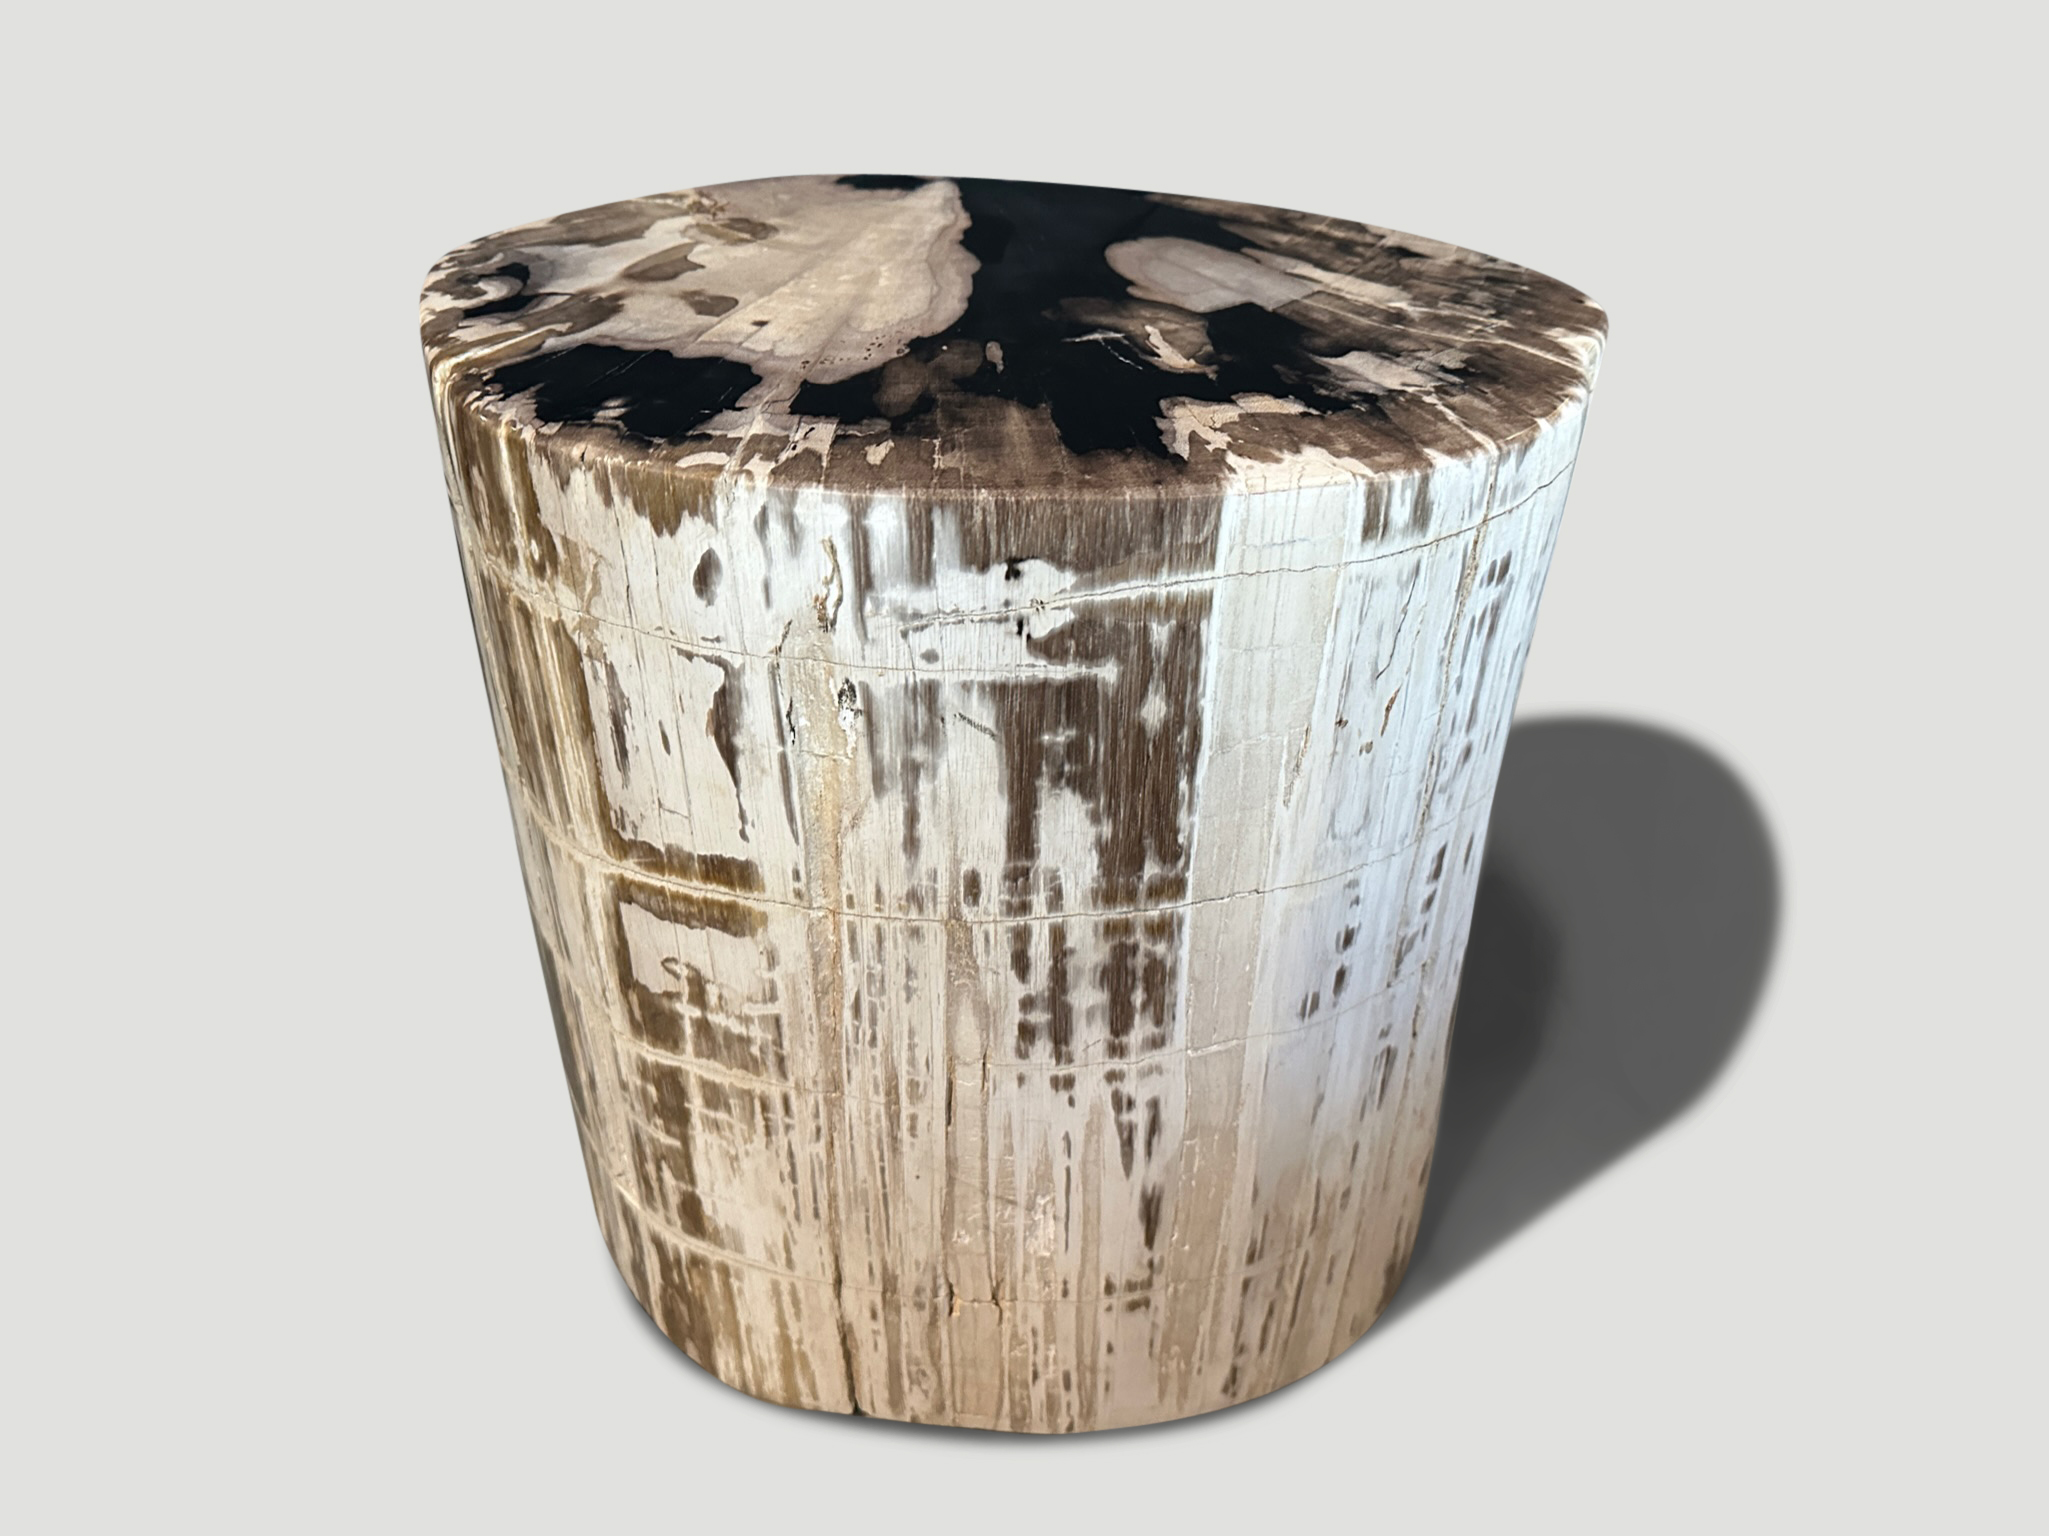 high quality petrified wood ancient side table